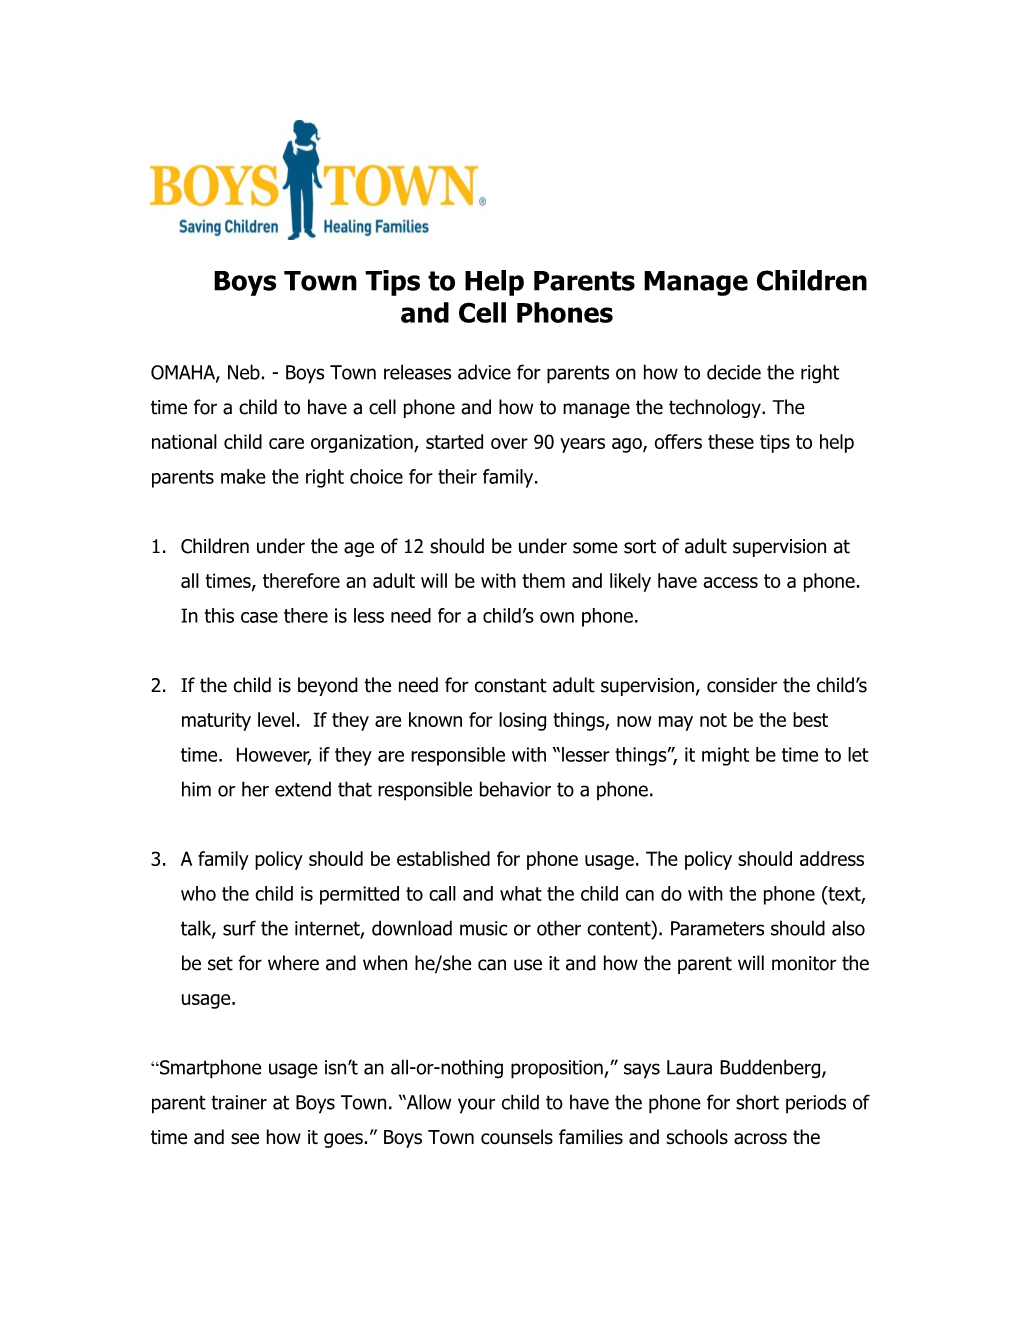 Boys Town Tips to Help Parents Manage Children and Cell Phones